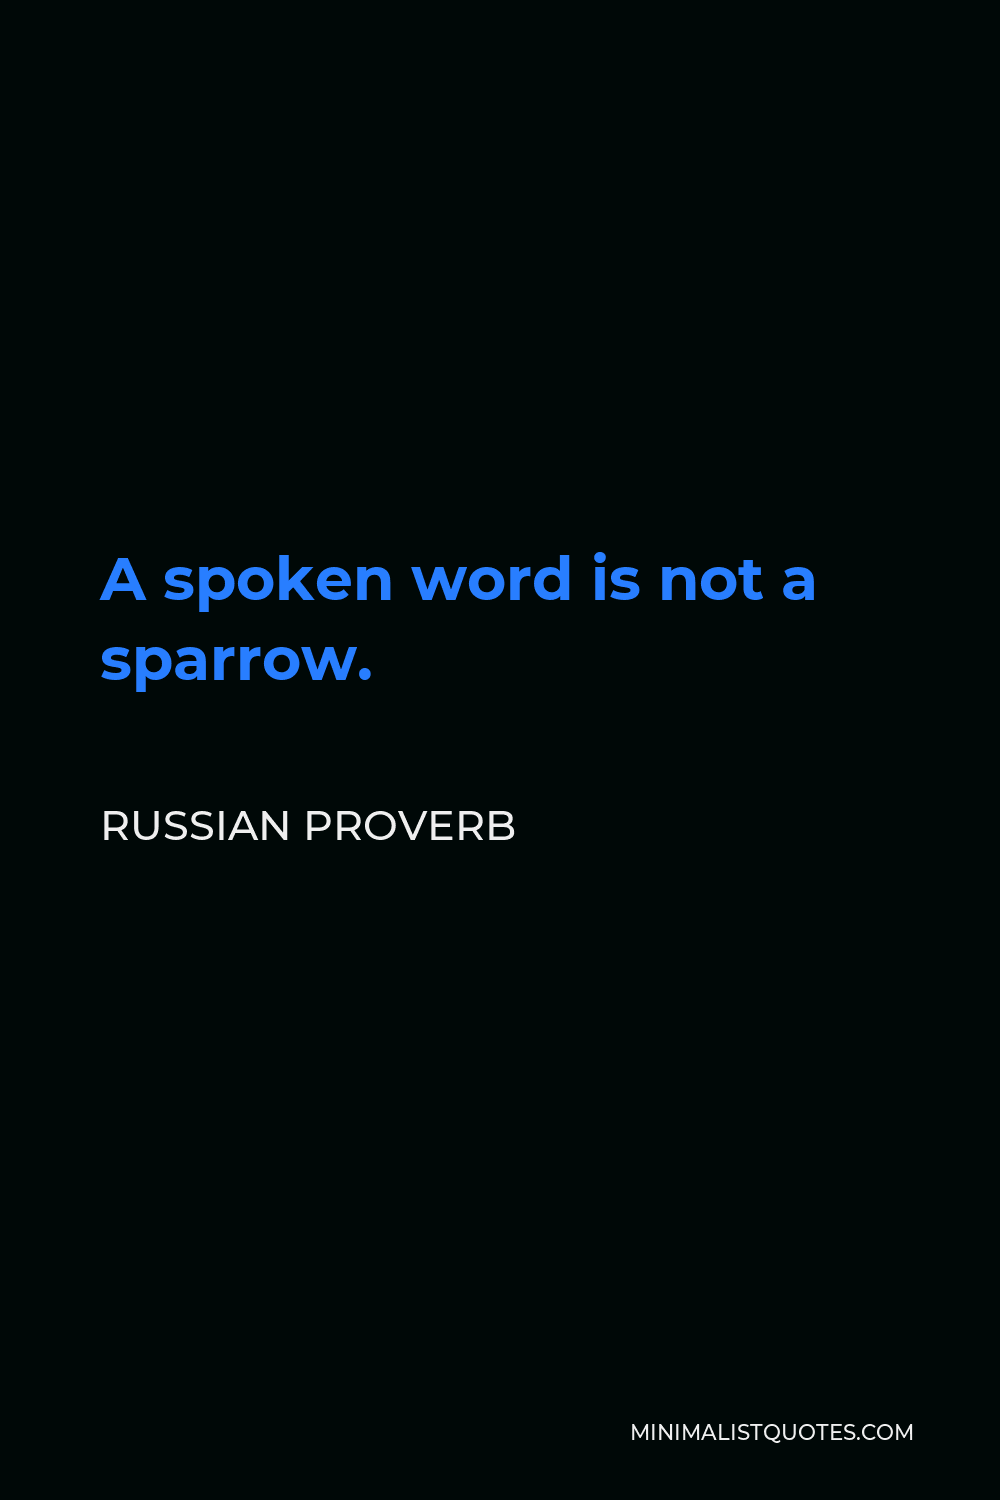 Russian Proverb Quote - A spoken word is not a sparrow.